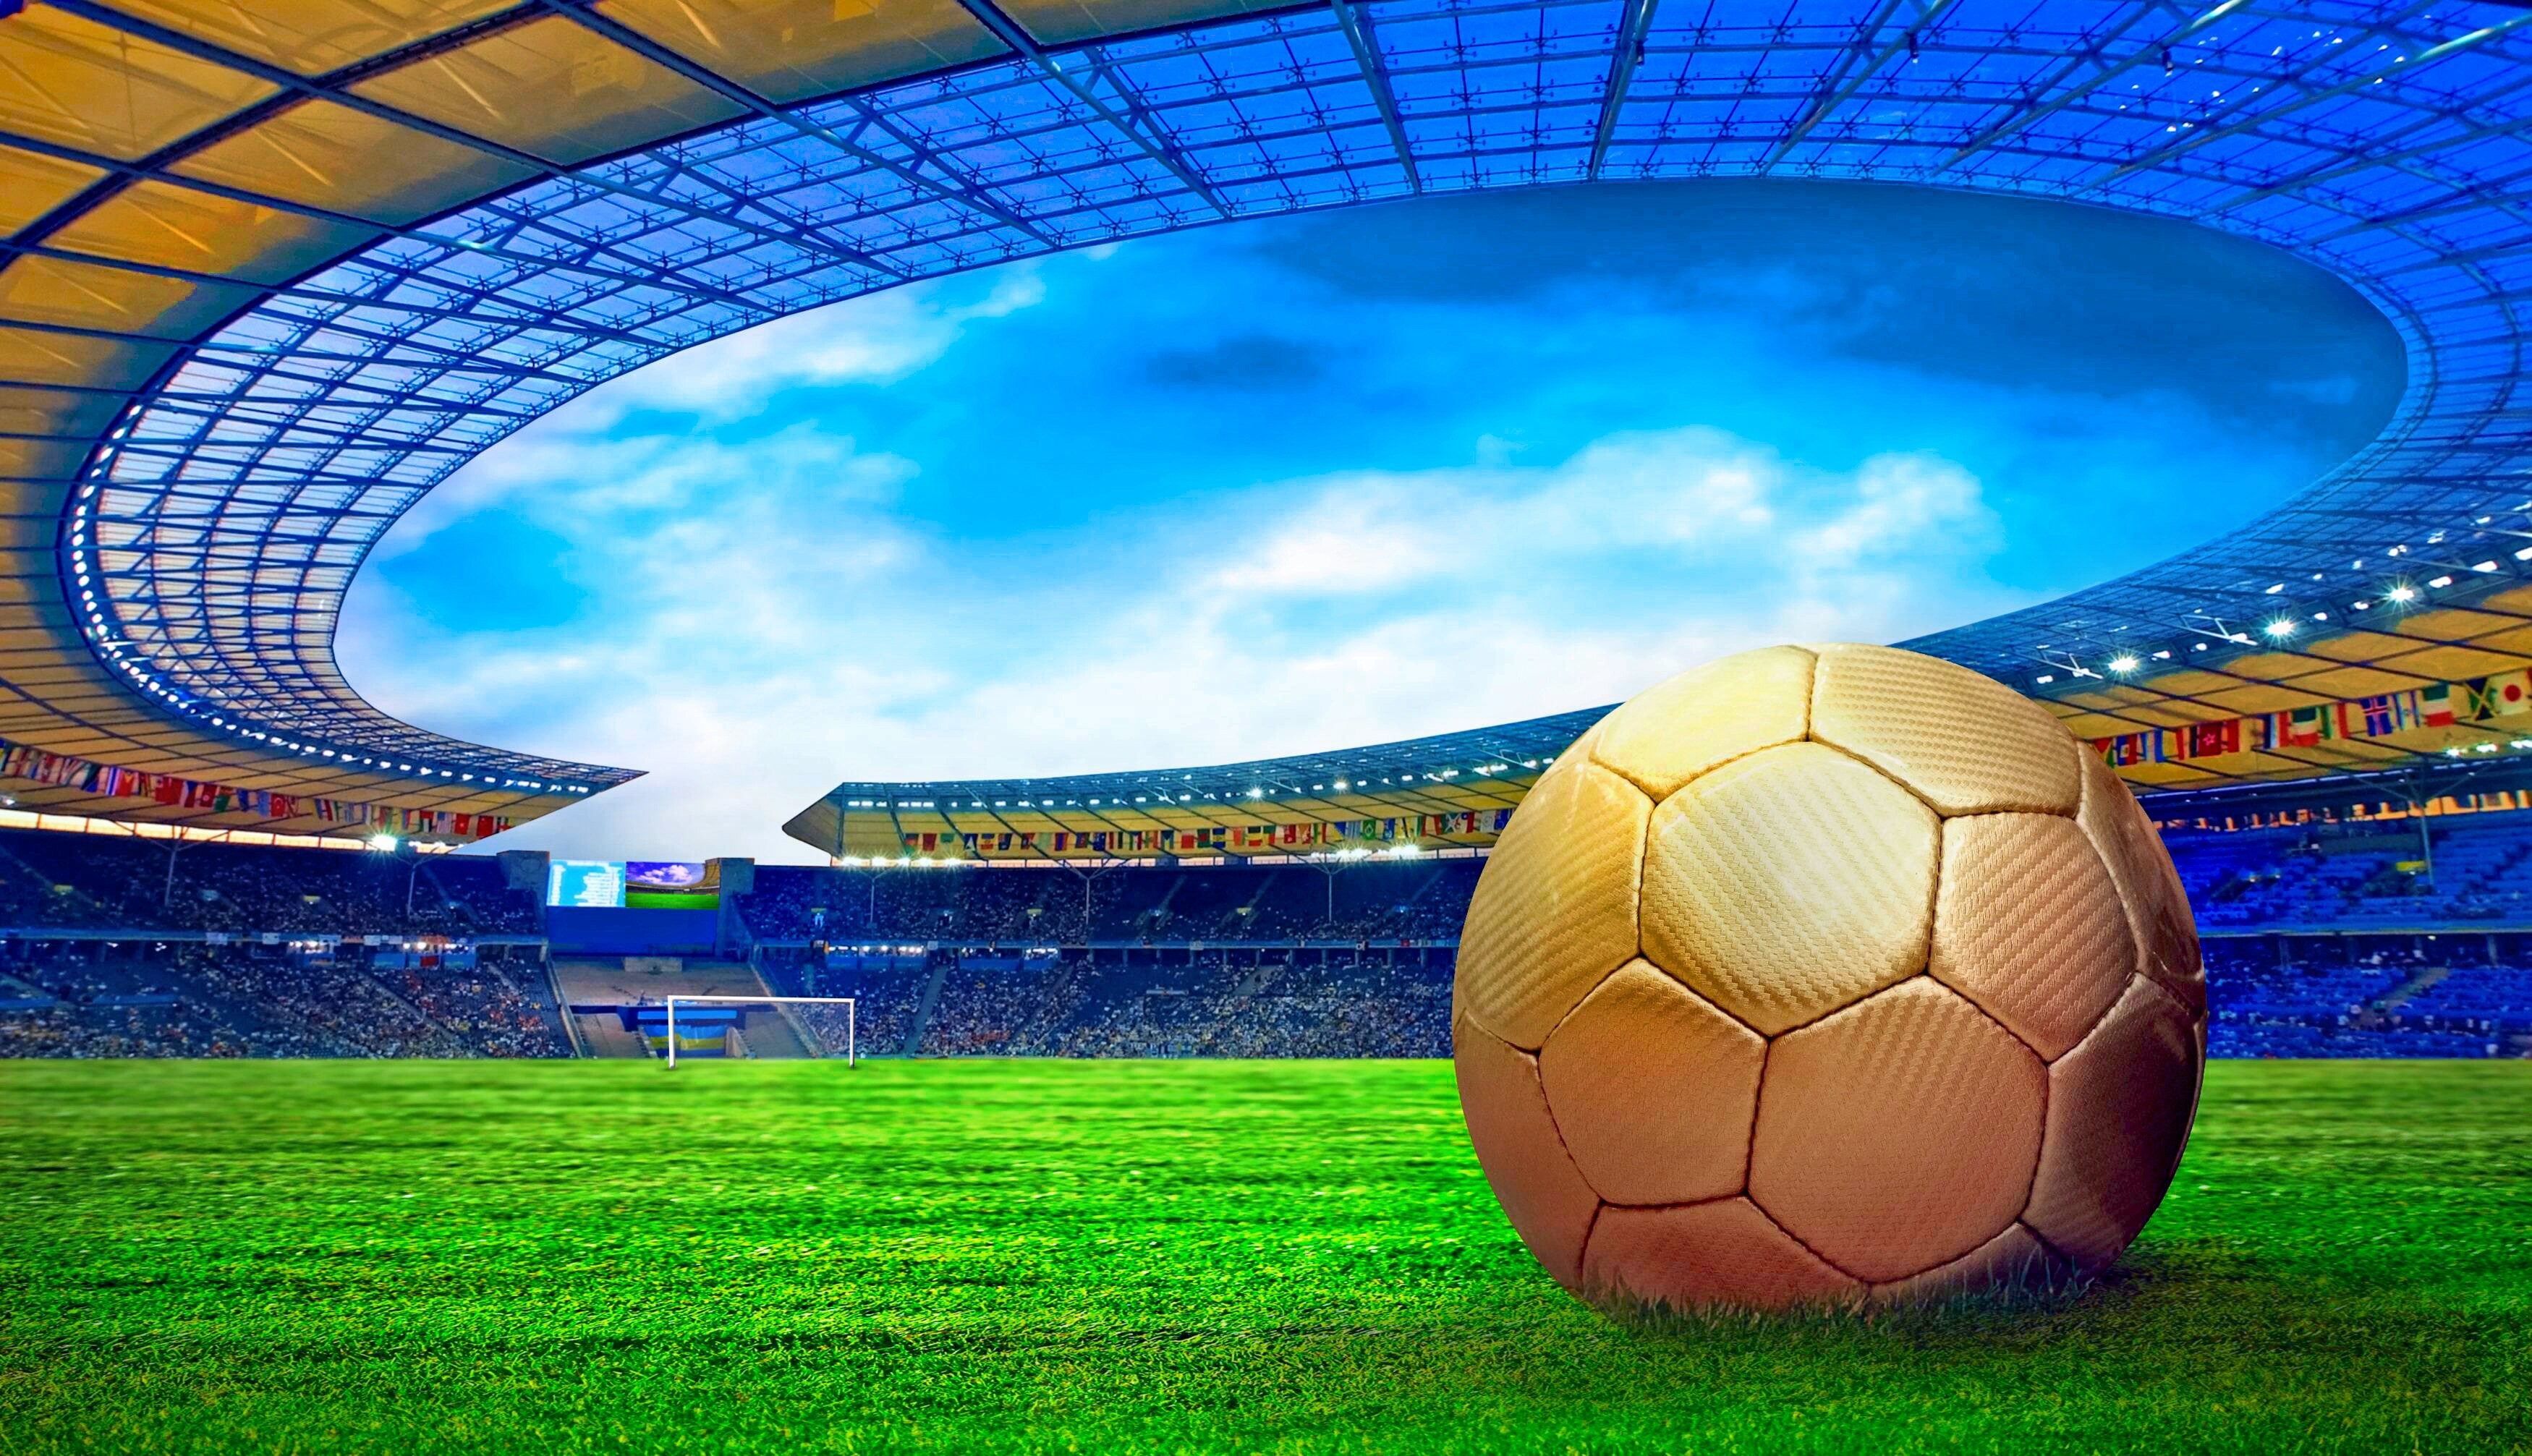 Goal (Sports): World cup, The ball with spherical truncated icosahedron design, Natural grass. 3500x2020 HD Wallpaper.